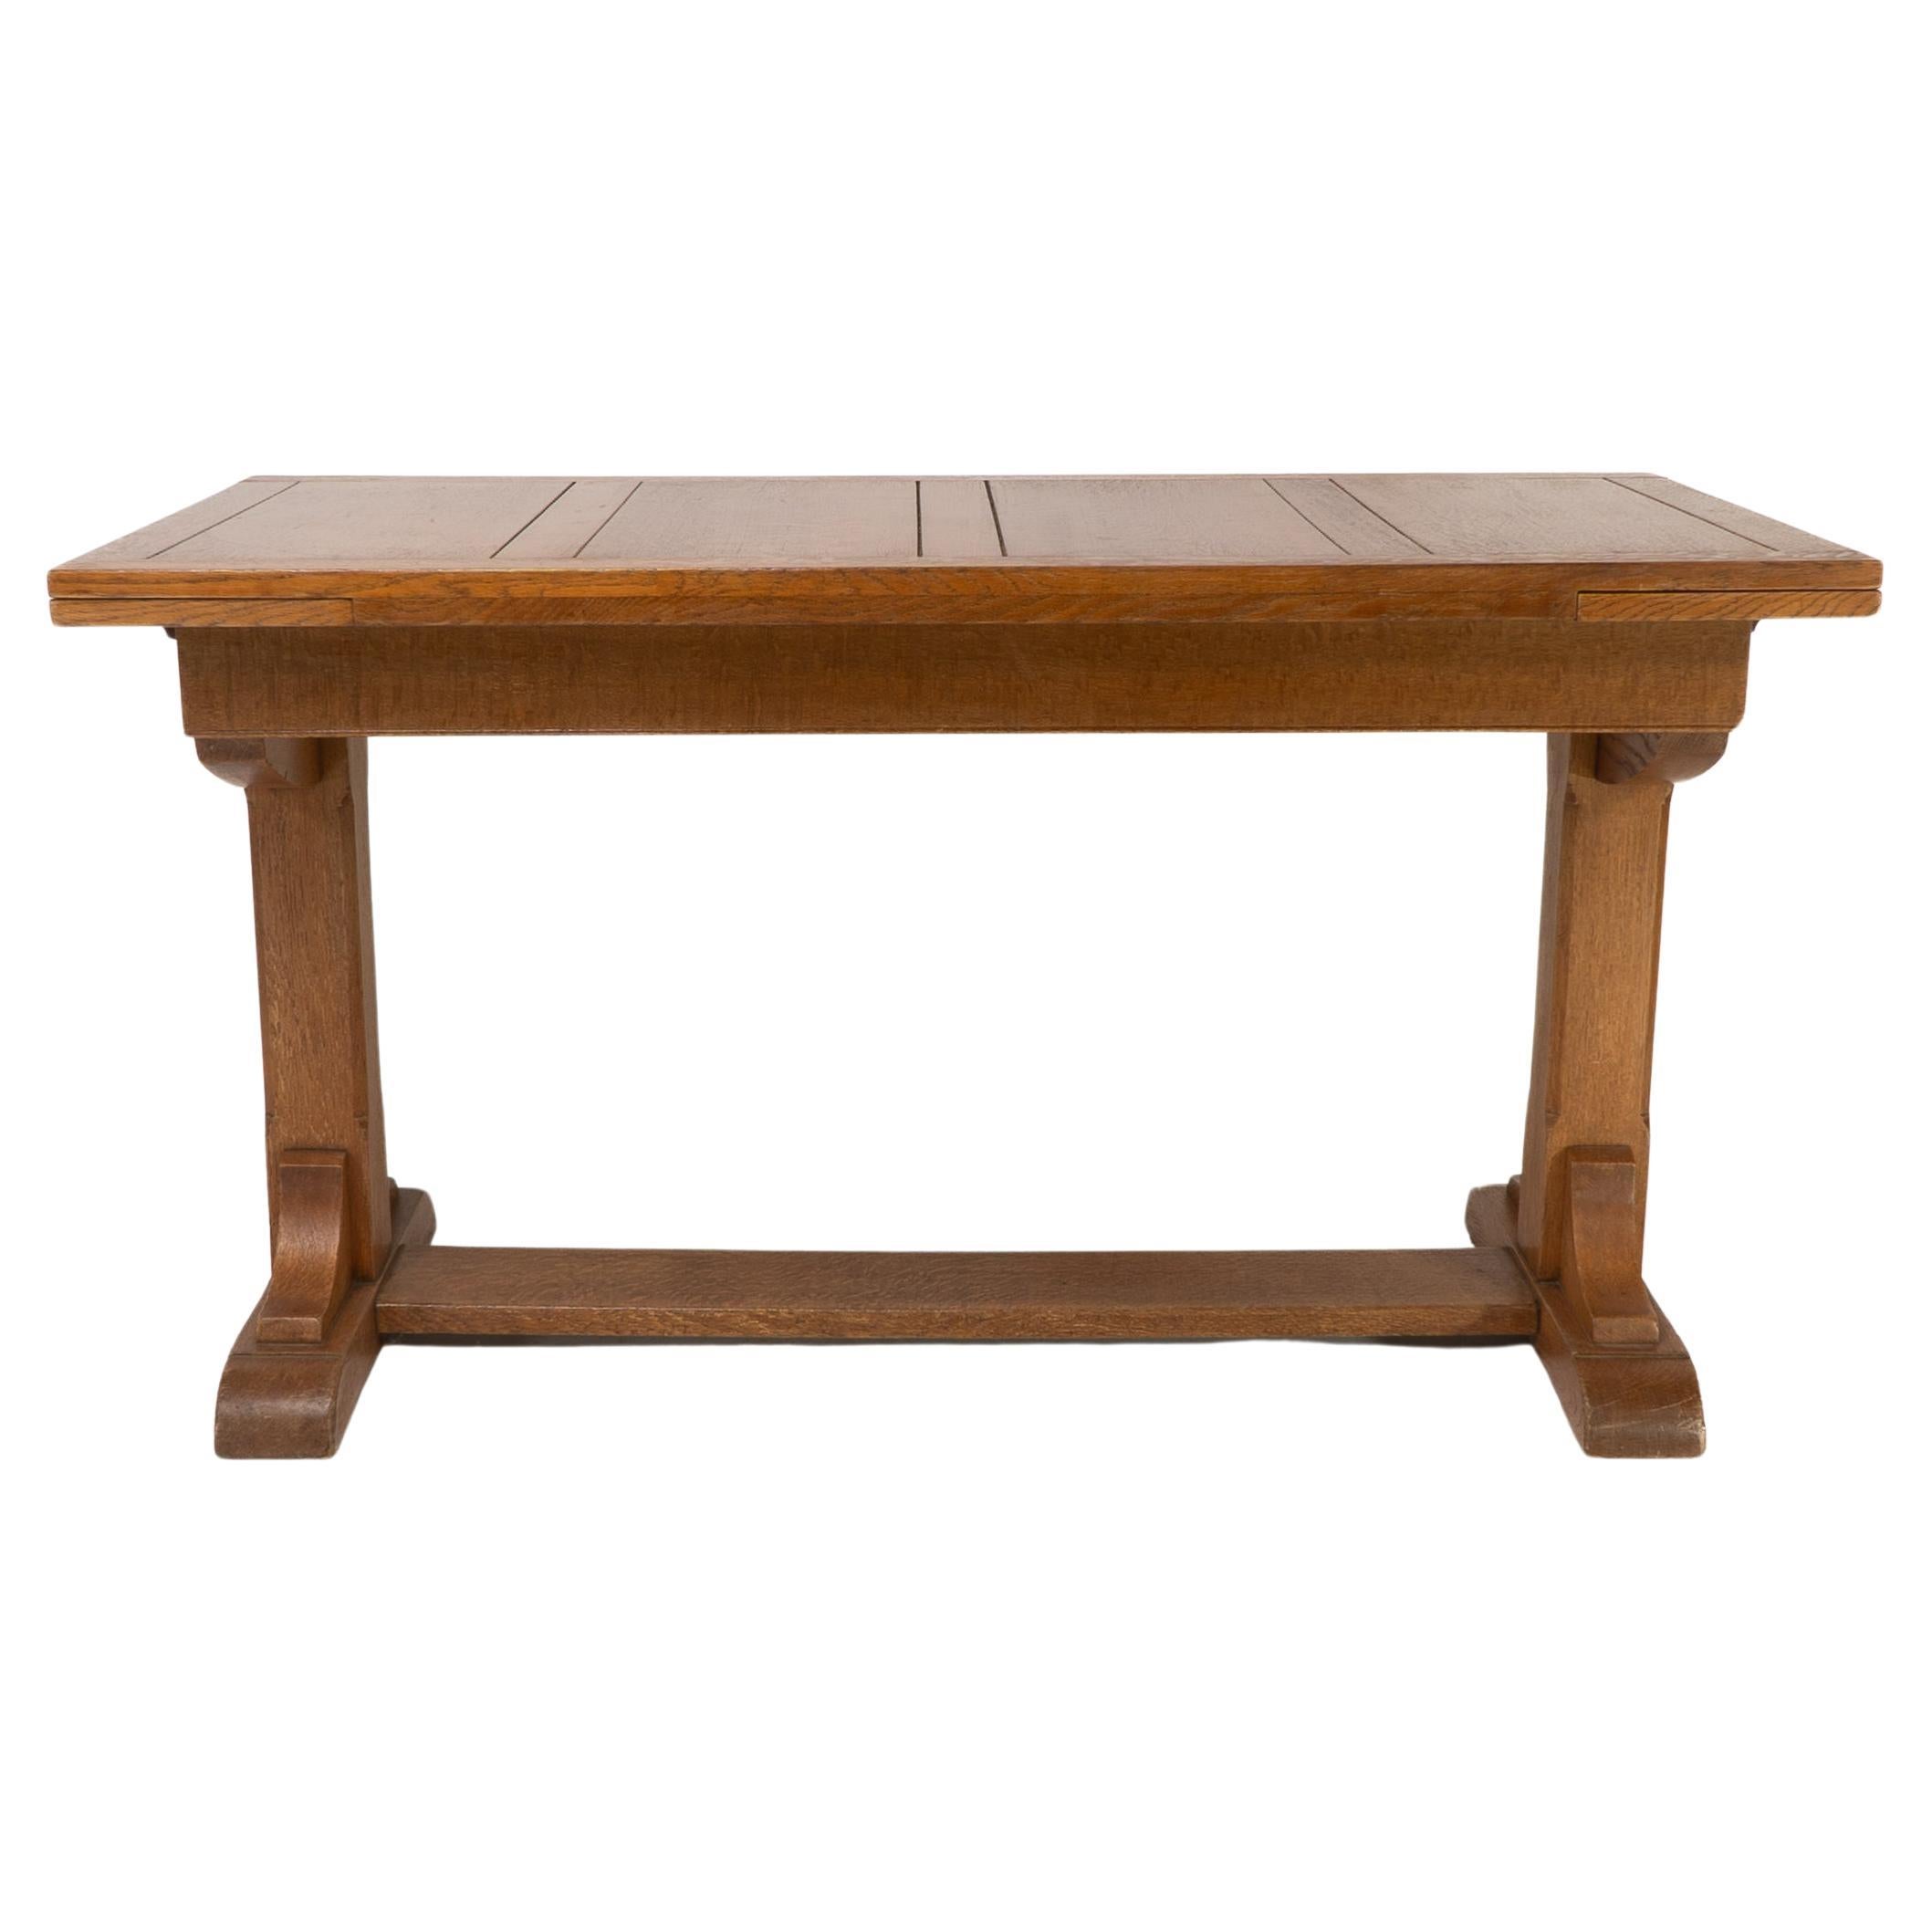 Heals and Son. An Arts and Crafts narrow oak extending dining table with two leaves.Dimensions: Height 76 cm x Width 137 cm x Depth 69 cmExtended: Height 76 cm x Width 183 cm x Depth 69 cm
